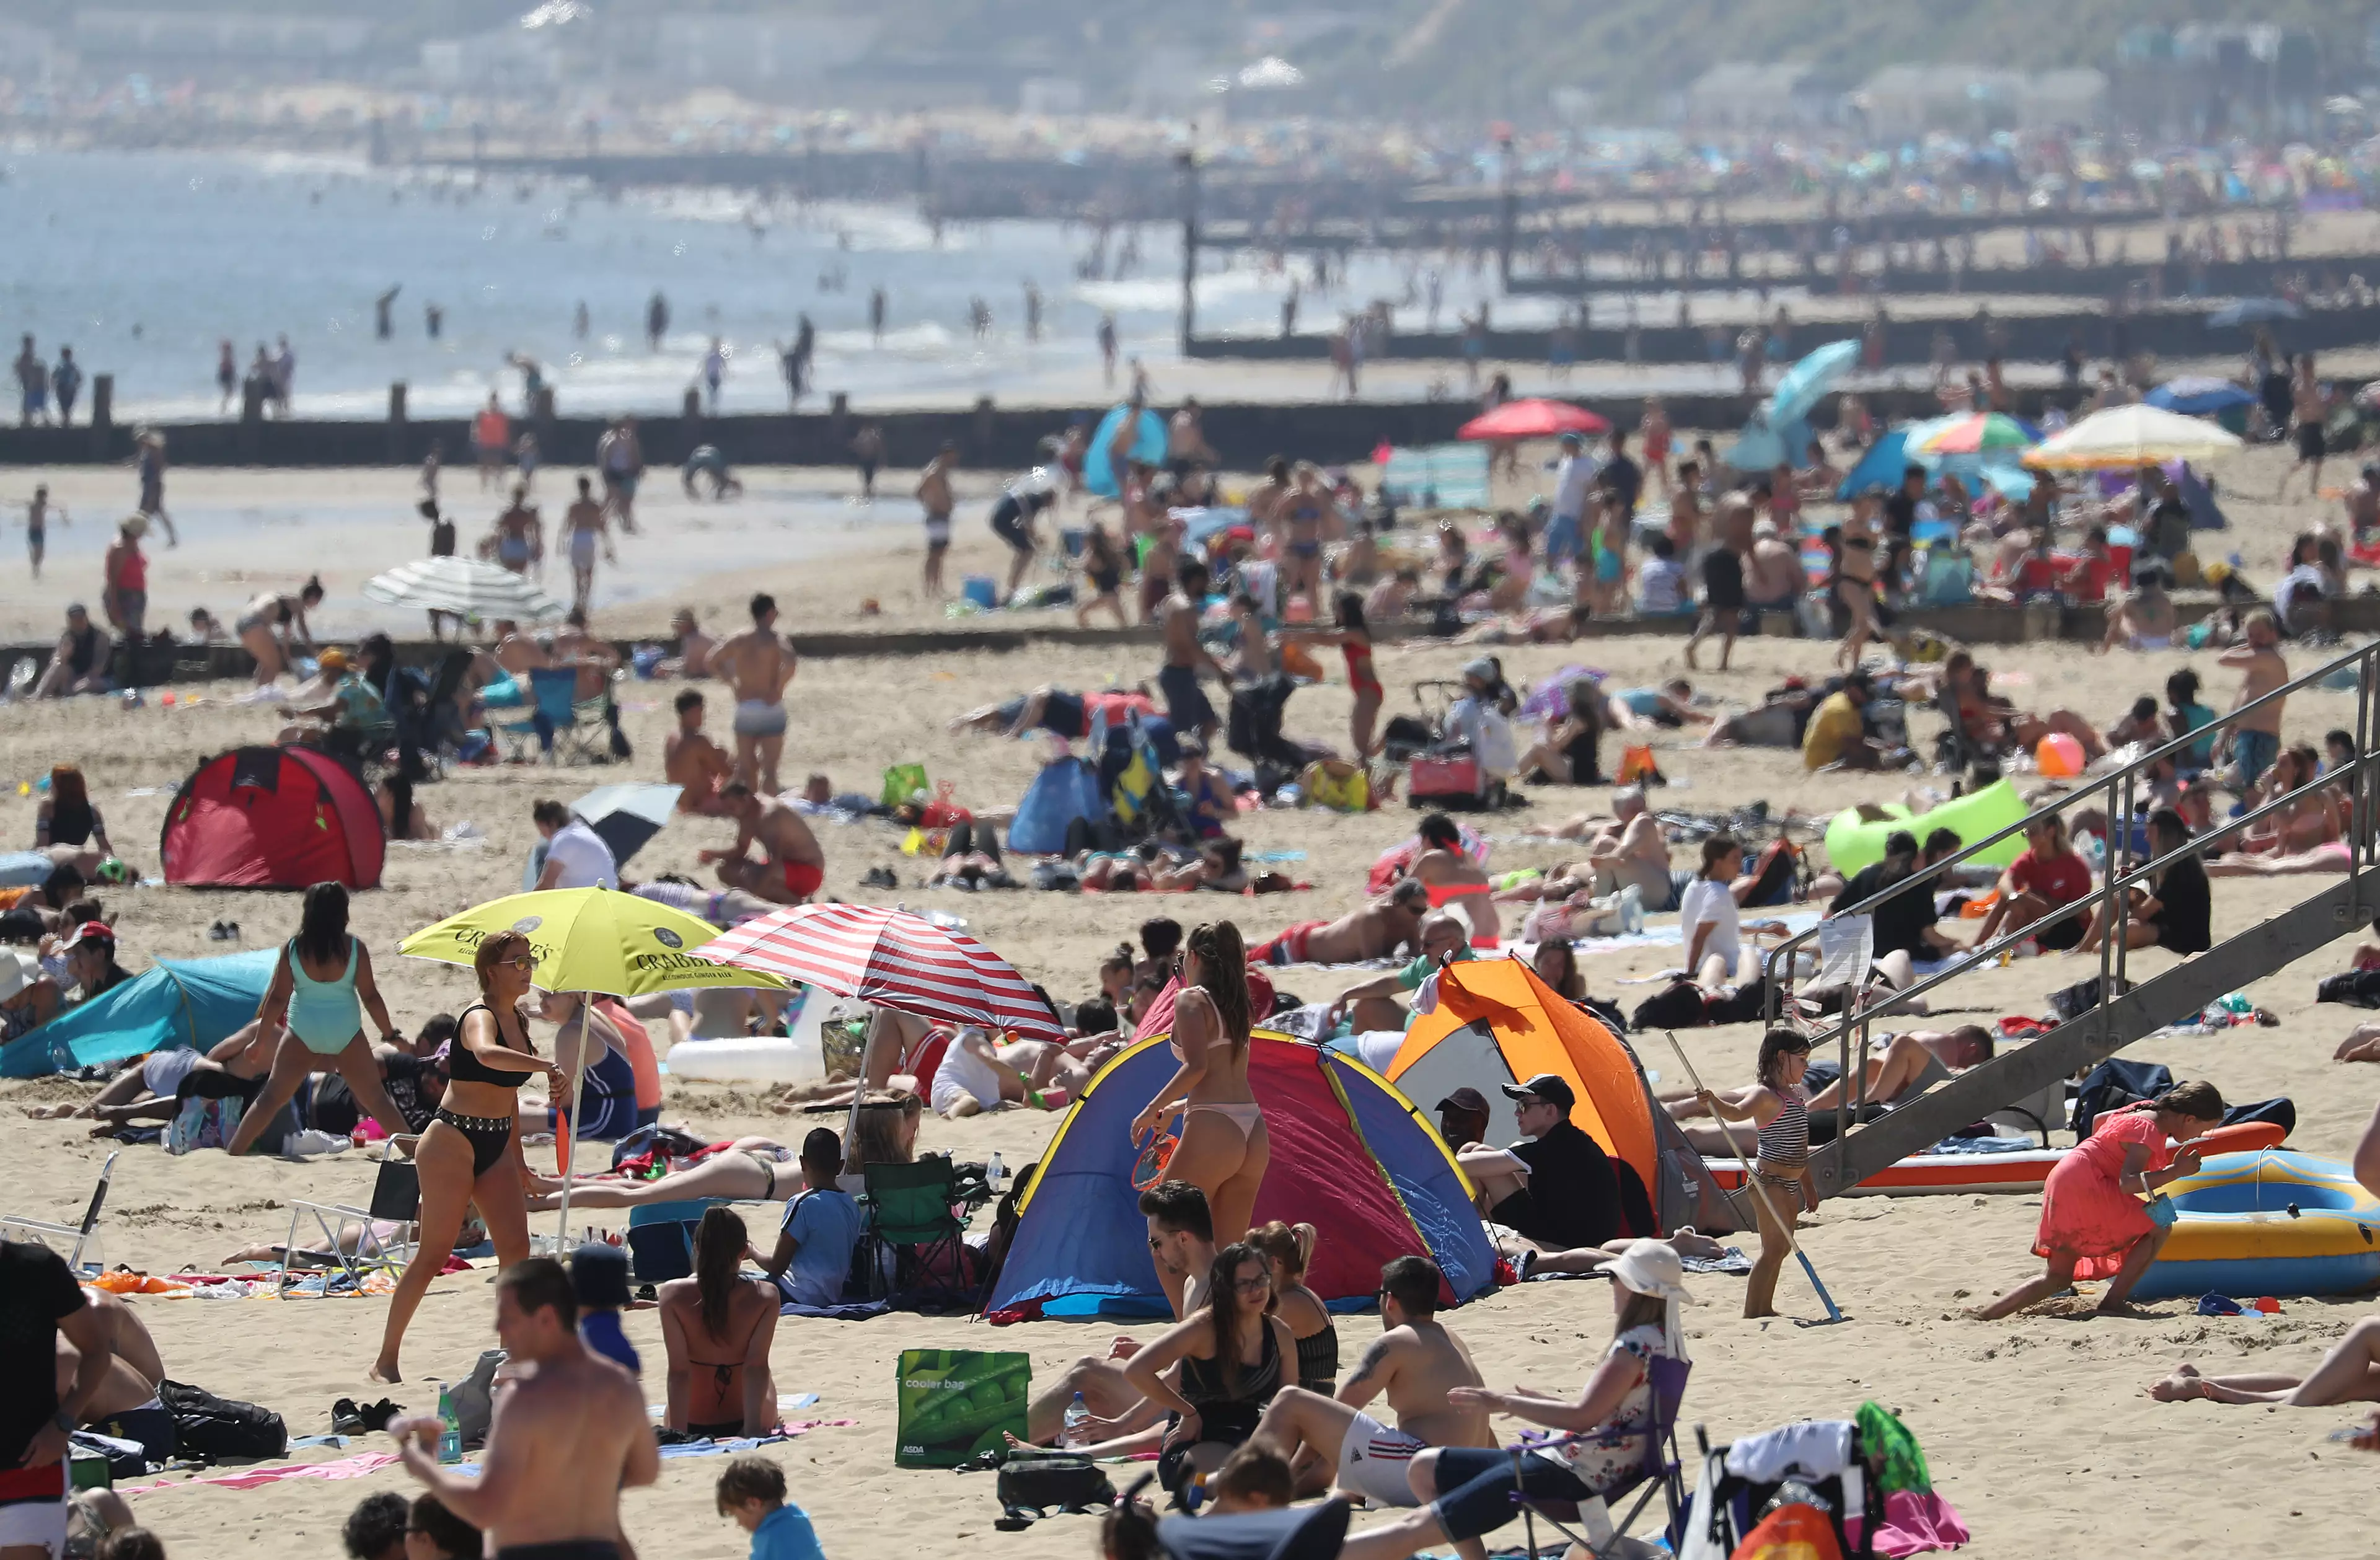 People flocked to enjoy the good weather at Bournemouth beach in Dorset.